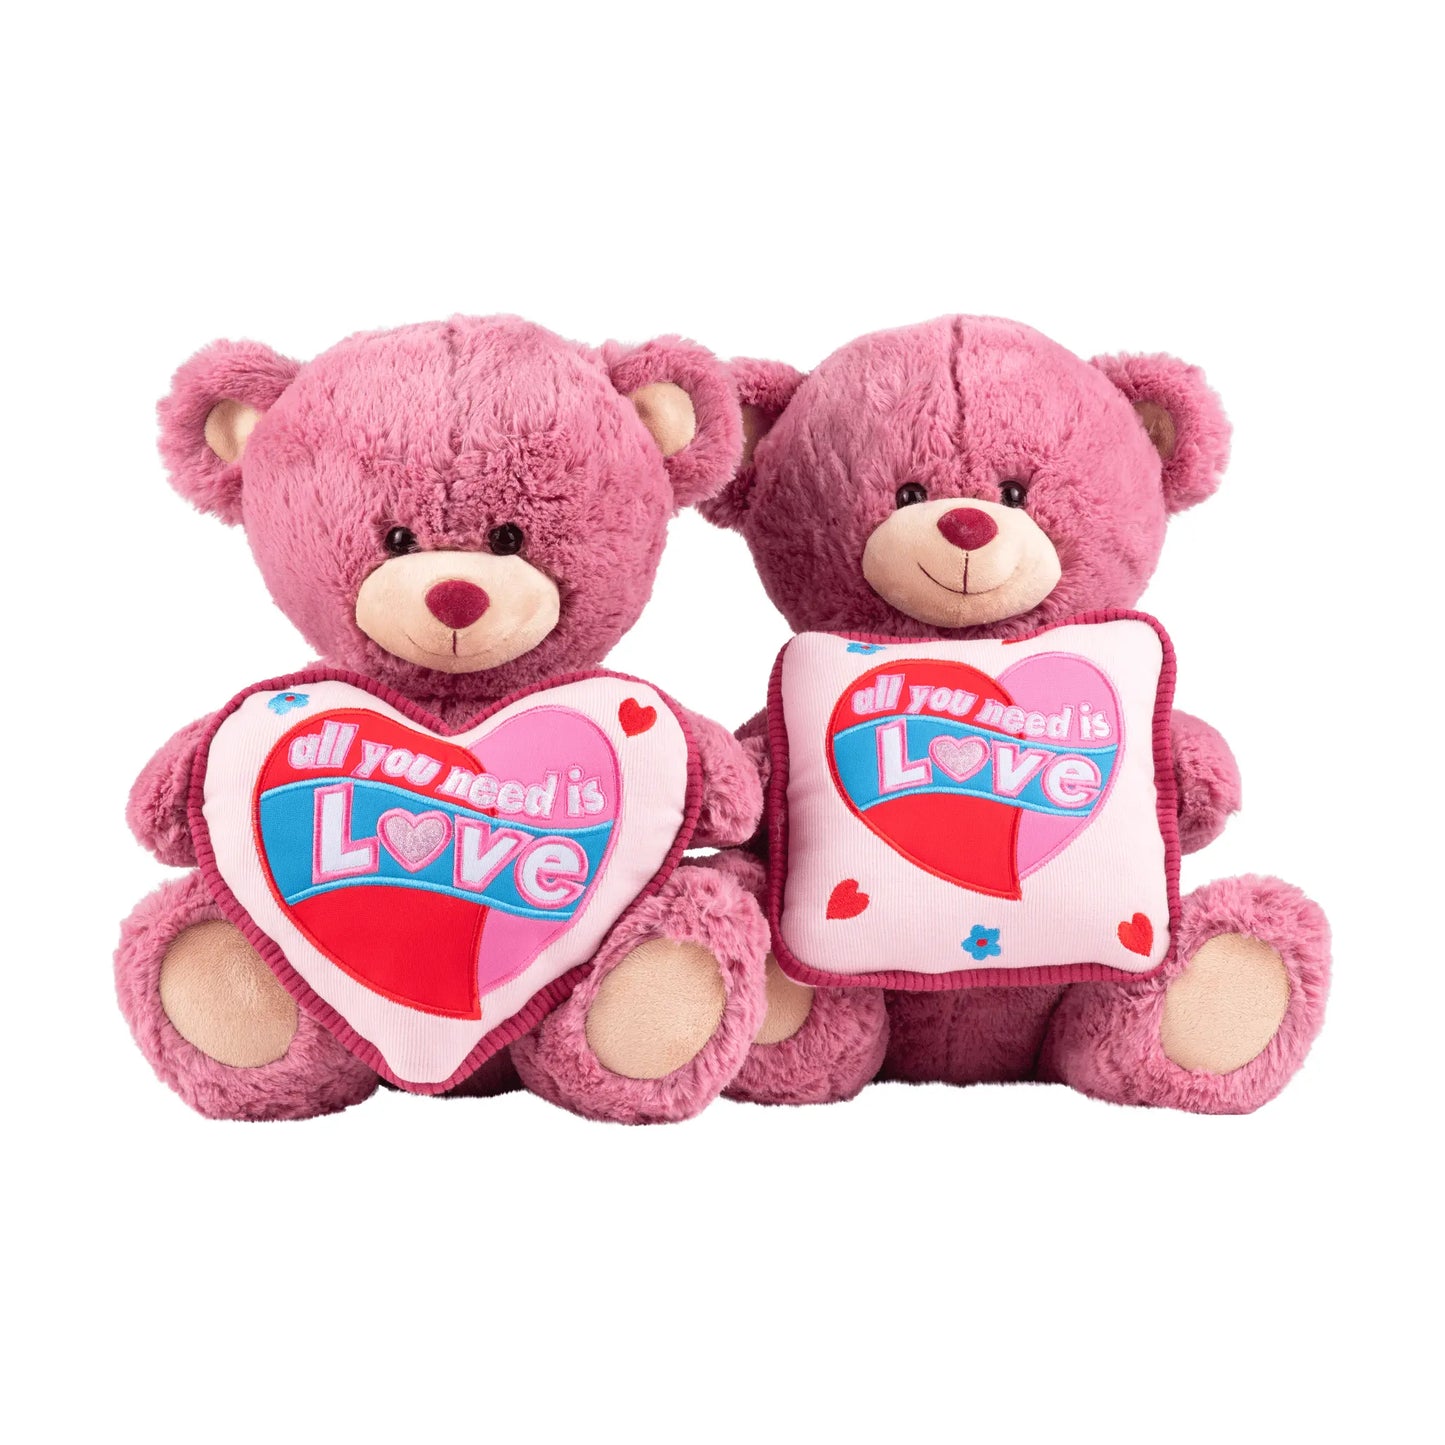 All you need is love bear 35 cm